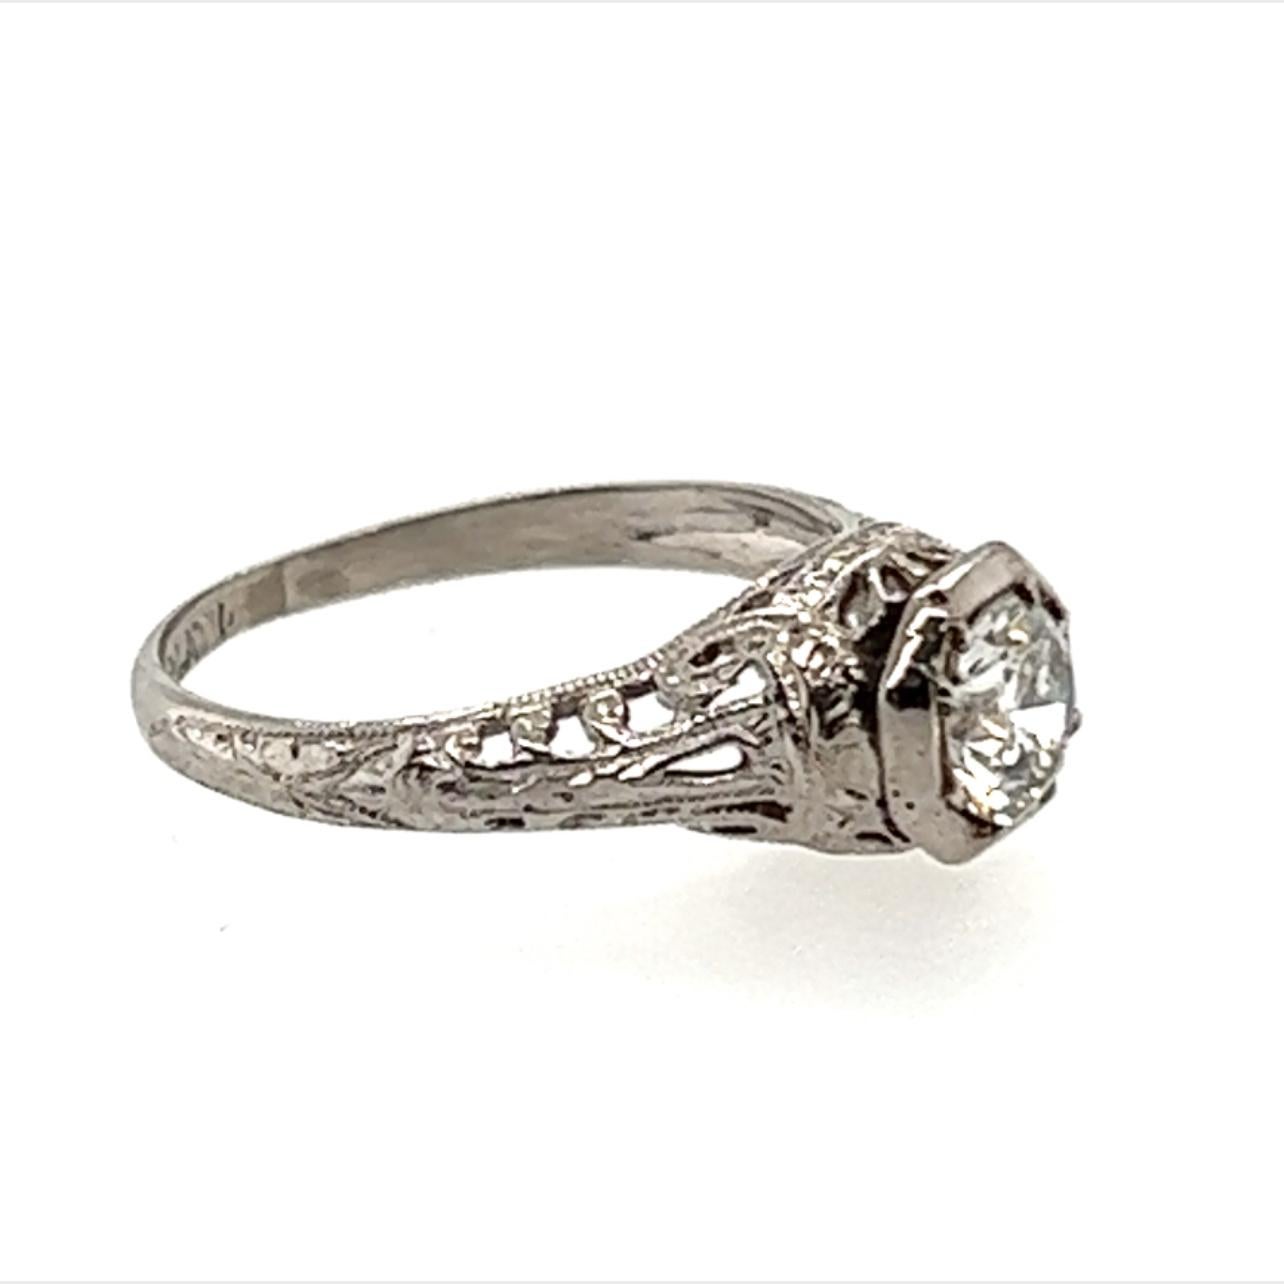 Genuine Original Antique Art Deco from 1930s Vintage .45ct Diamond Platinum Solitaire Art Deco Engagement Ring



Featuring a Spectacular .45ct I/SI1 Genuine Transitional Cut Natural Diamond Center

Absolutely Jaw-Dropping Hand Carved Art Deco